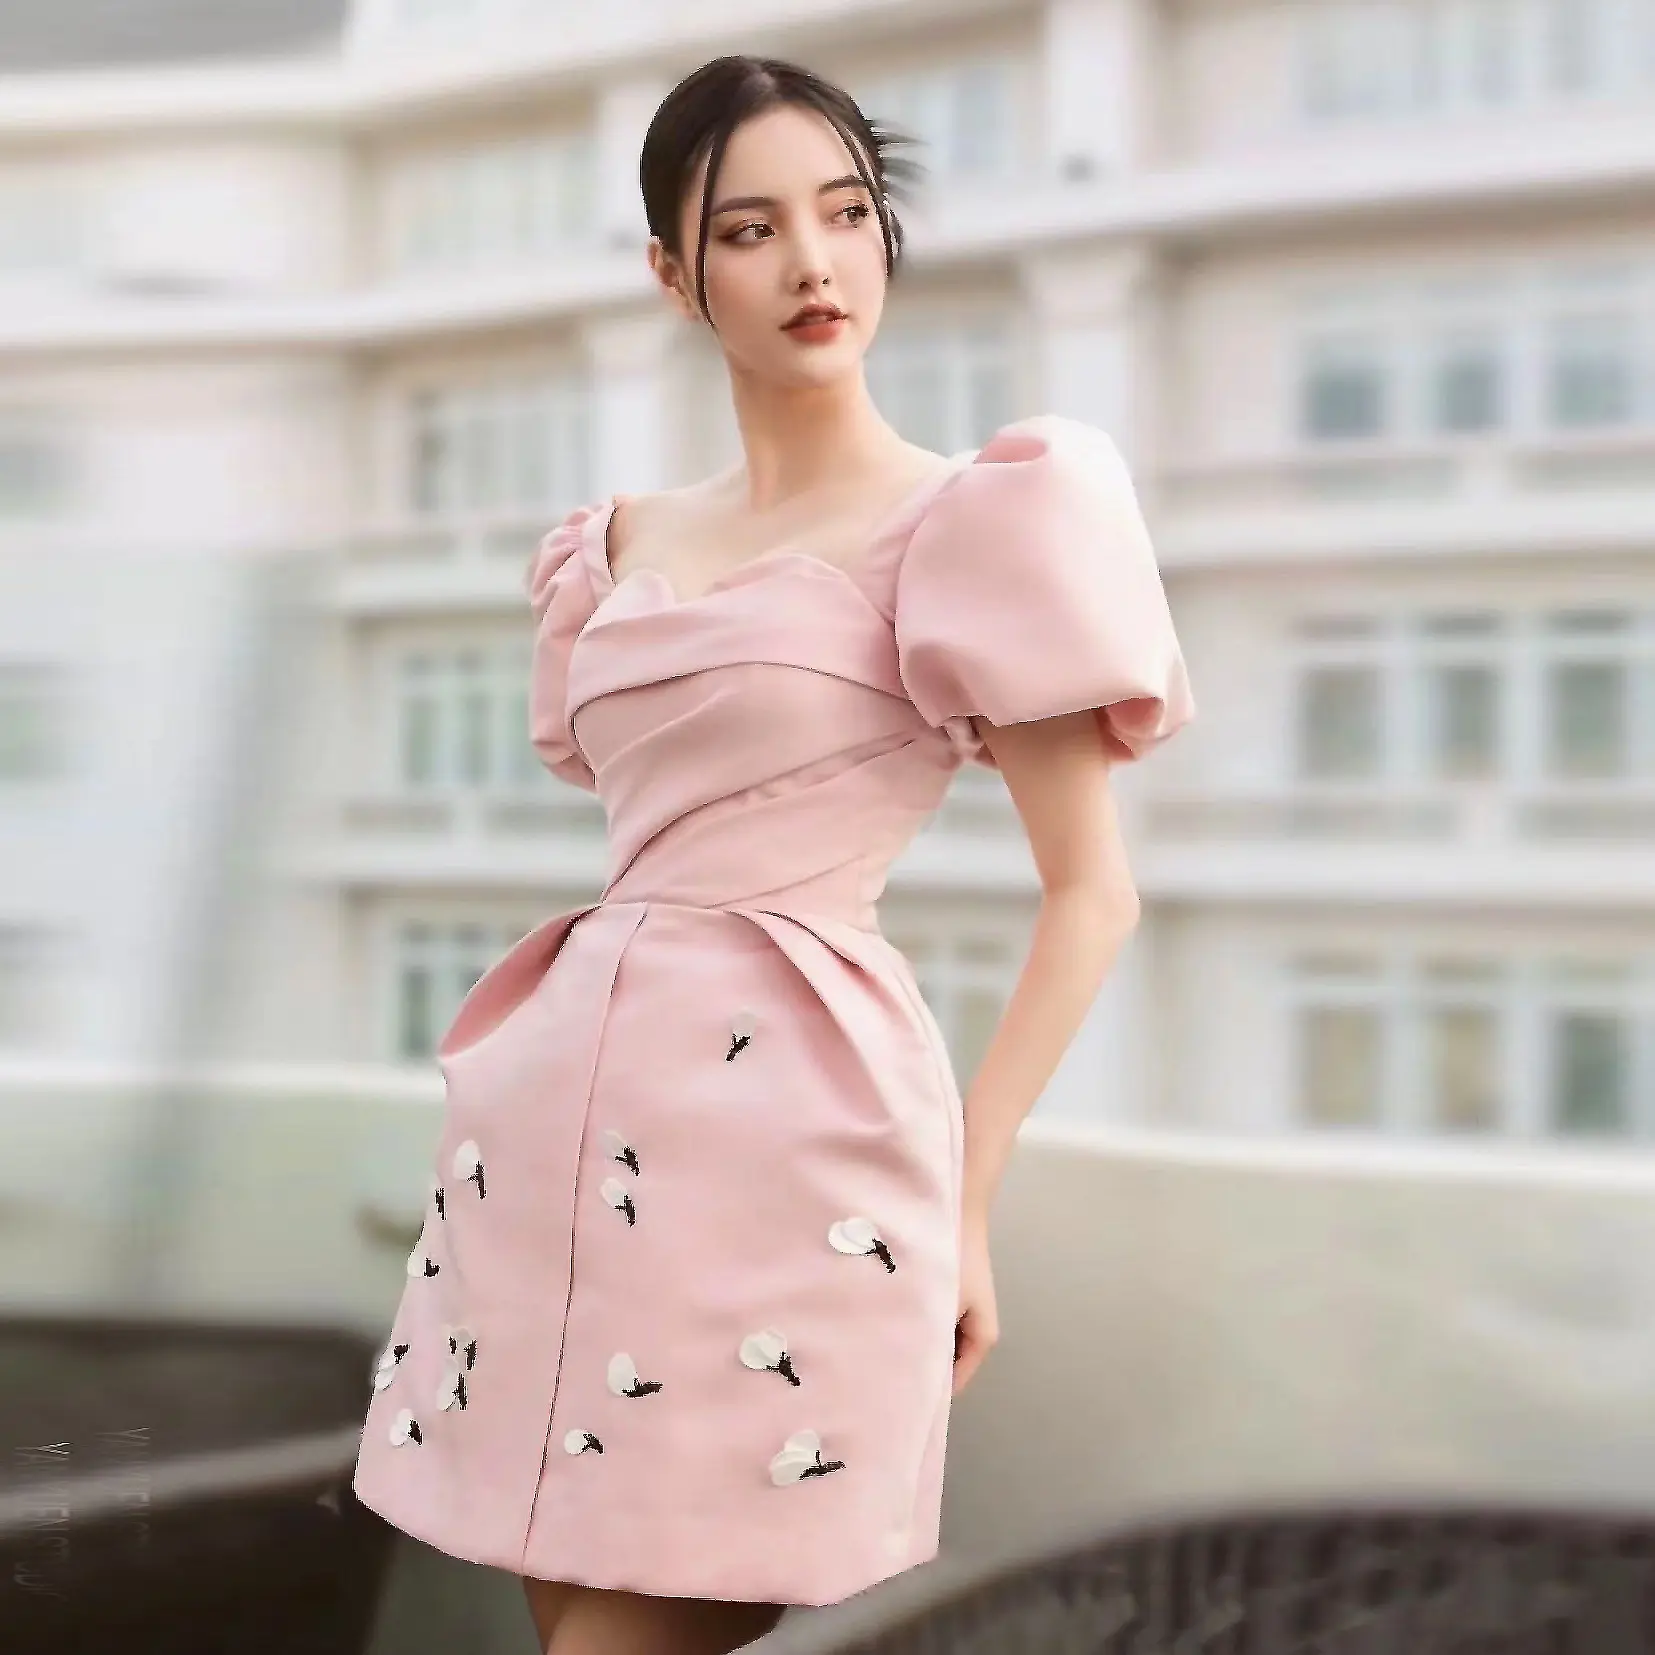 ZYHT 9996 Summer Fashion High End Mini Dress Clothes Women Pink Puff Sleeve A-Line Pleated Dress for Women